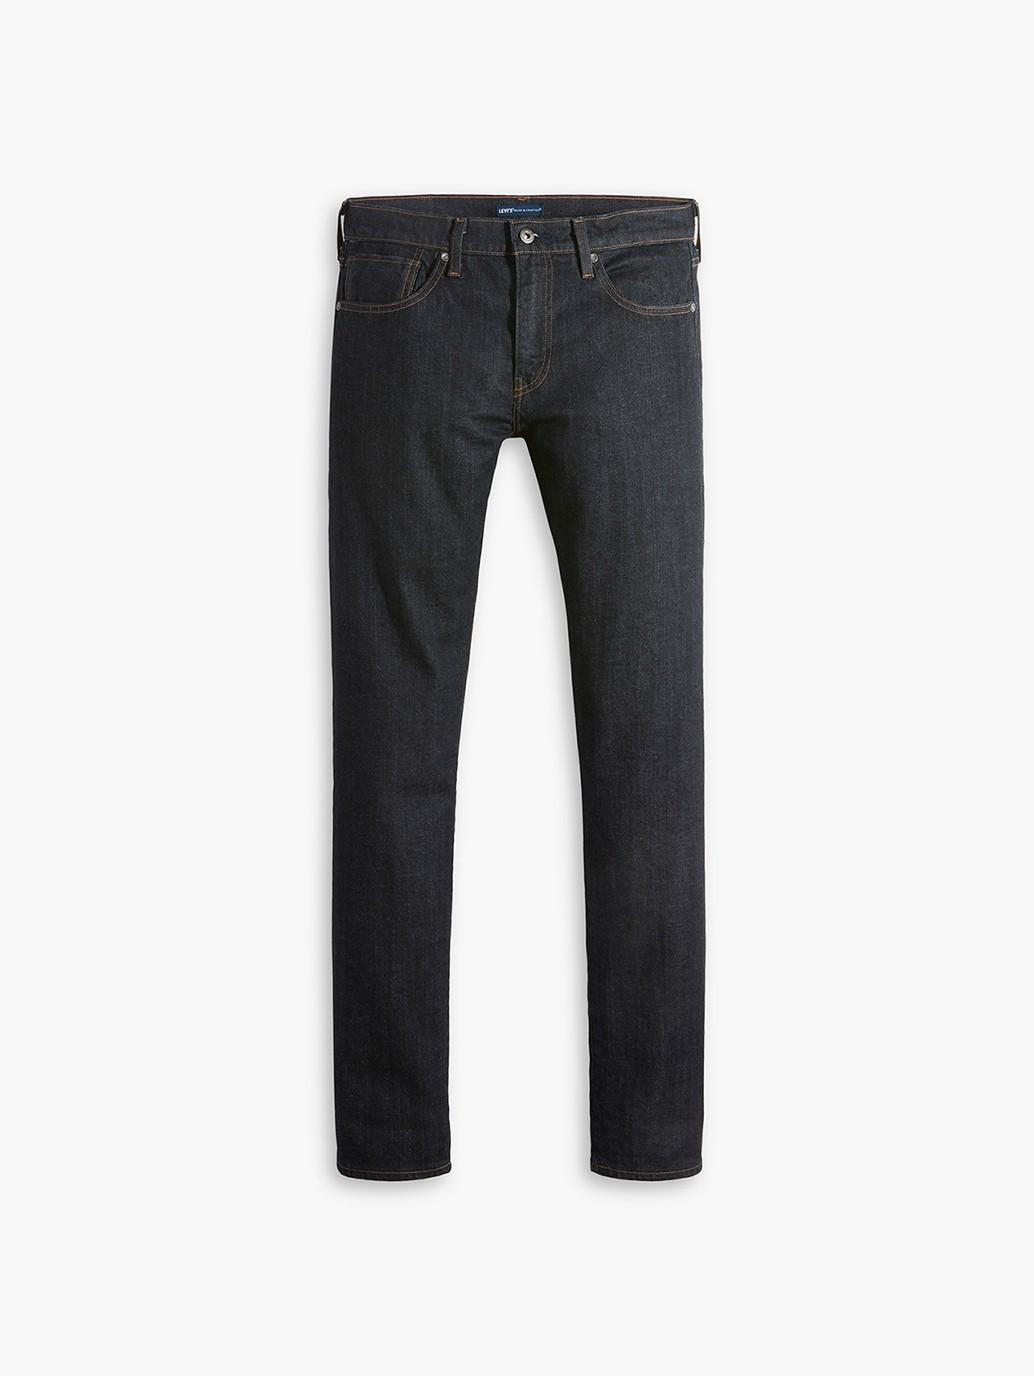 Buy Levi’s® Made & Crafted® 511™ Slim Fit Jeans | Levi’s® Official ...